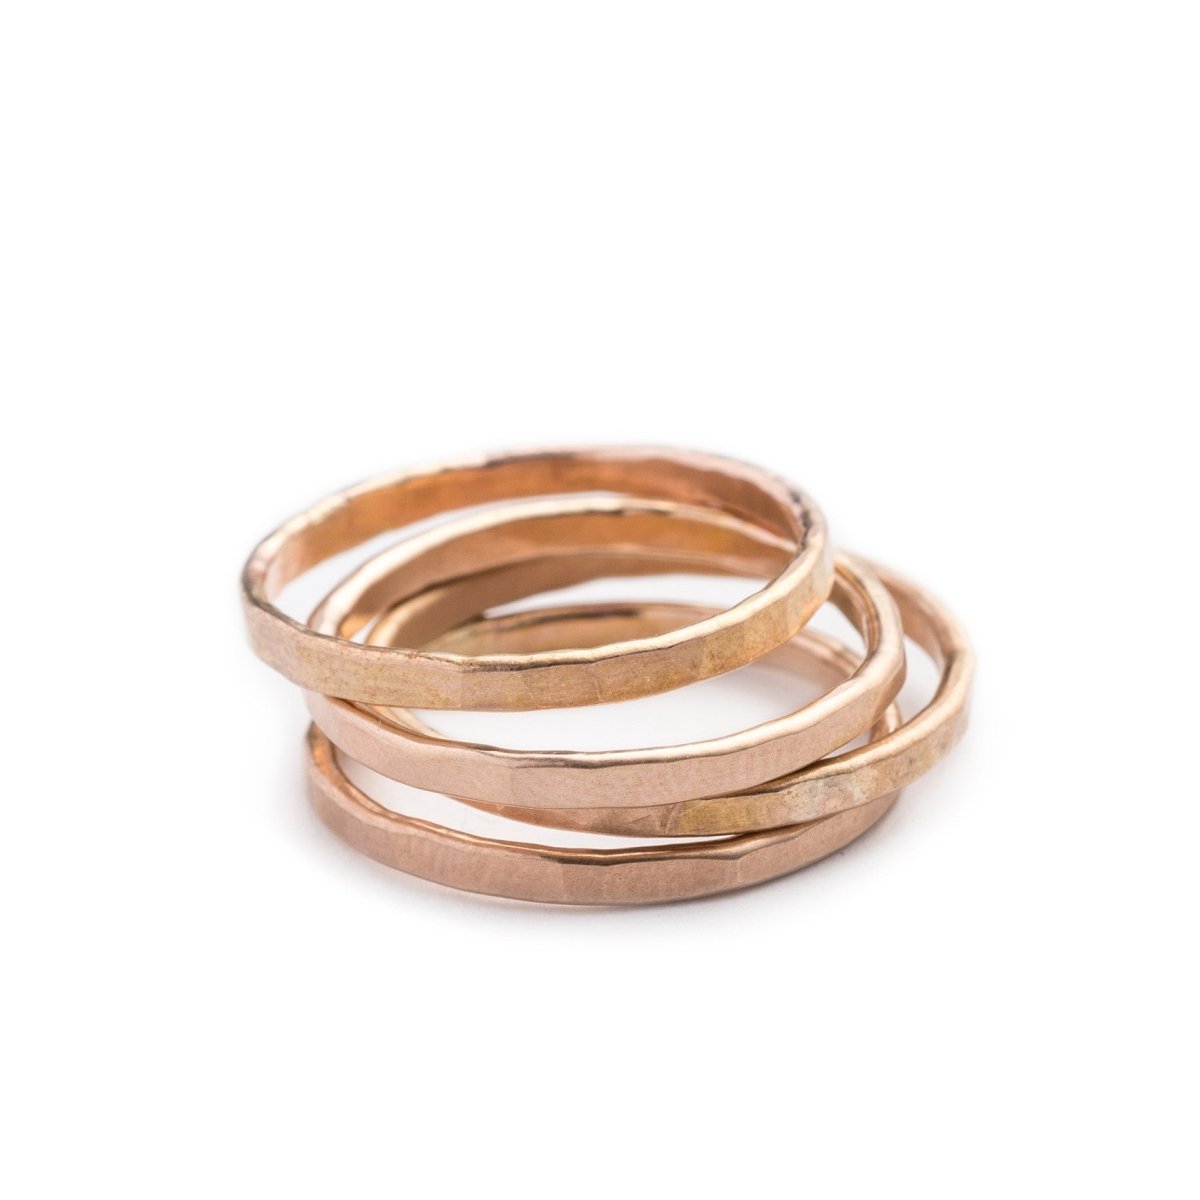 An eye-catching stack of 14k solid gold soldered bands with a hammered texture. Hand-crafted in Portland, Oregon. 